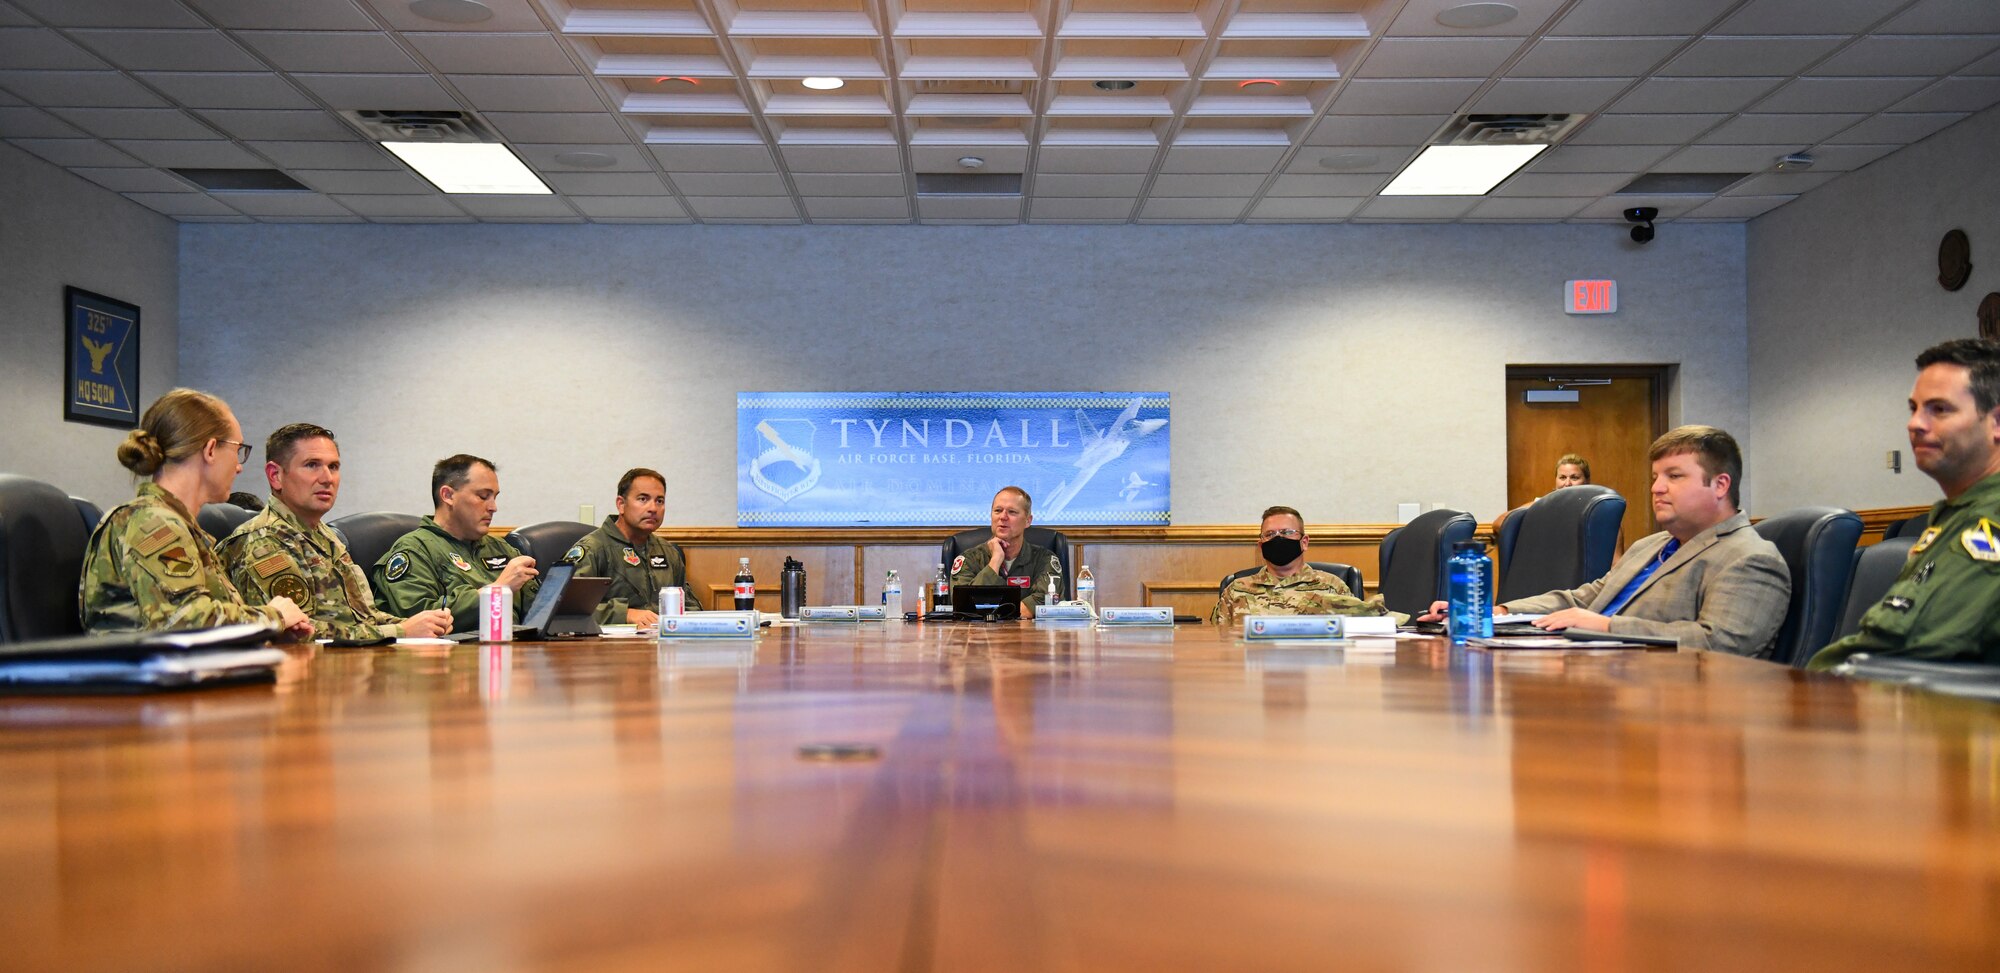 U.S. Air Force Gen. Mark Kelly (center), commander of Air Combat Command, and 325th Fighter Wing leadership converse before a briefing at Tyndall Air Force Base, Florida, Sept. 28, 2020. Kelly was briefed on Tyndall’s master plan for the rebuild before going on a tour of the base to see some of the facilities that have been renovated. (U.S. Air Force photo by Senior Airman Stefan Alvarez)